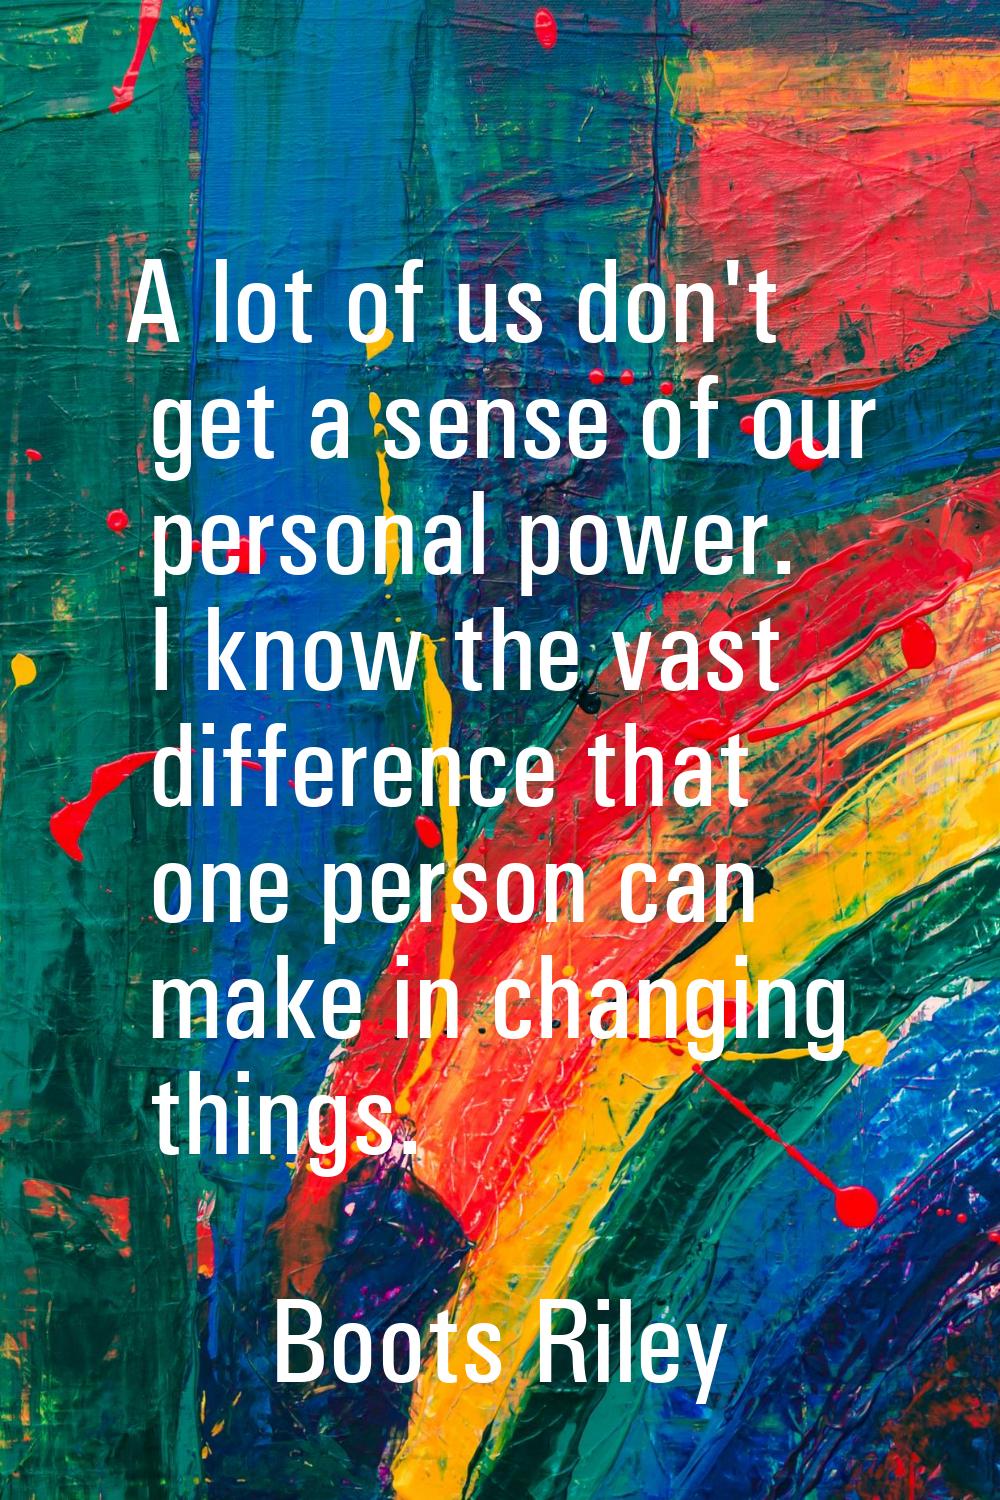 A lot of us don't get a sense of our personal power. I know the vast difference that one person can